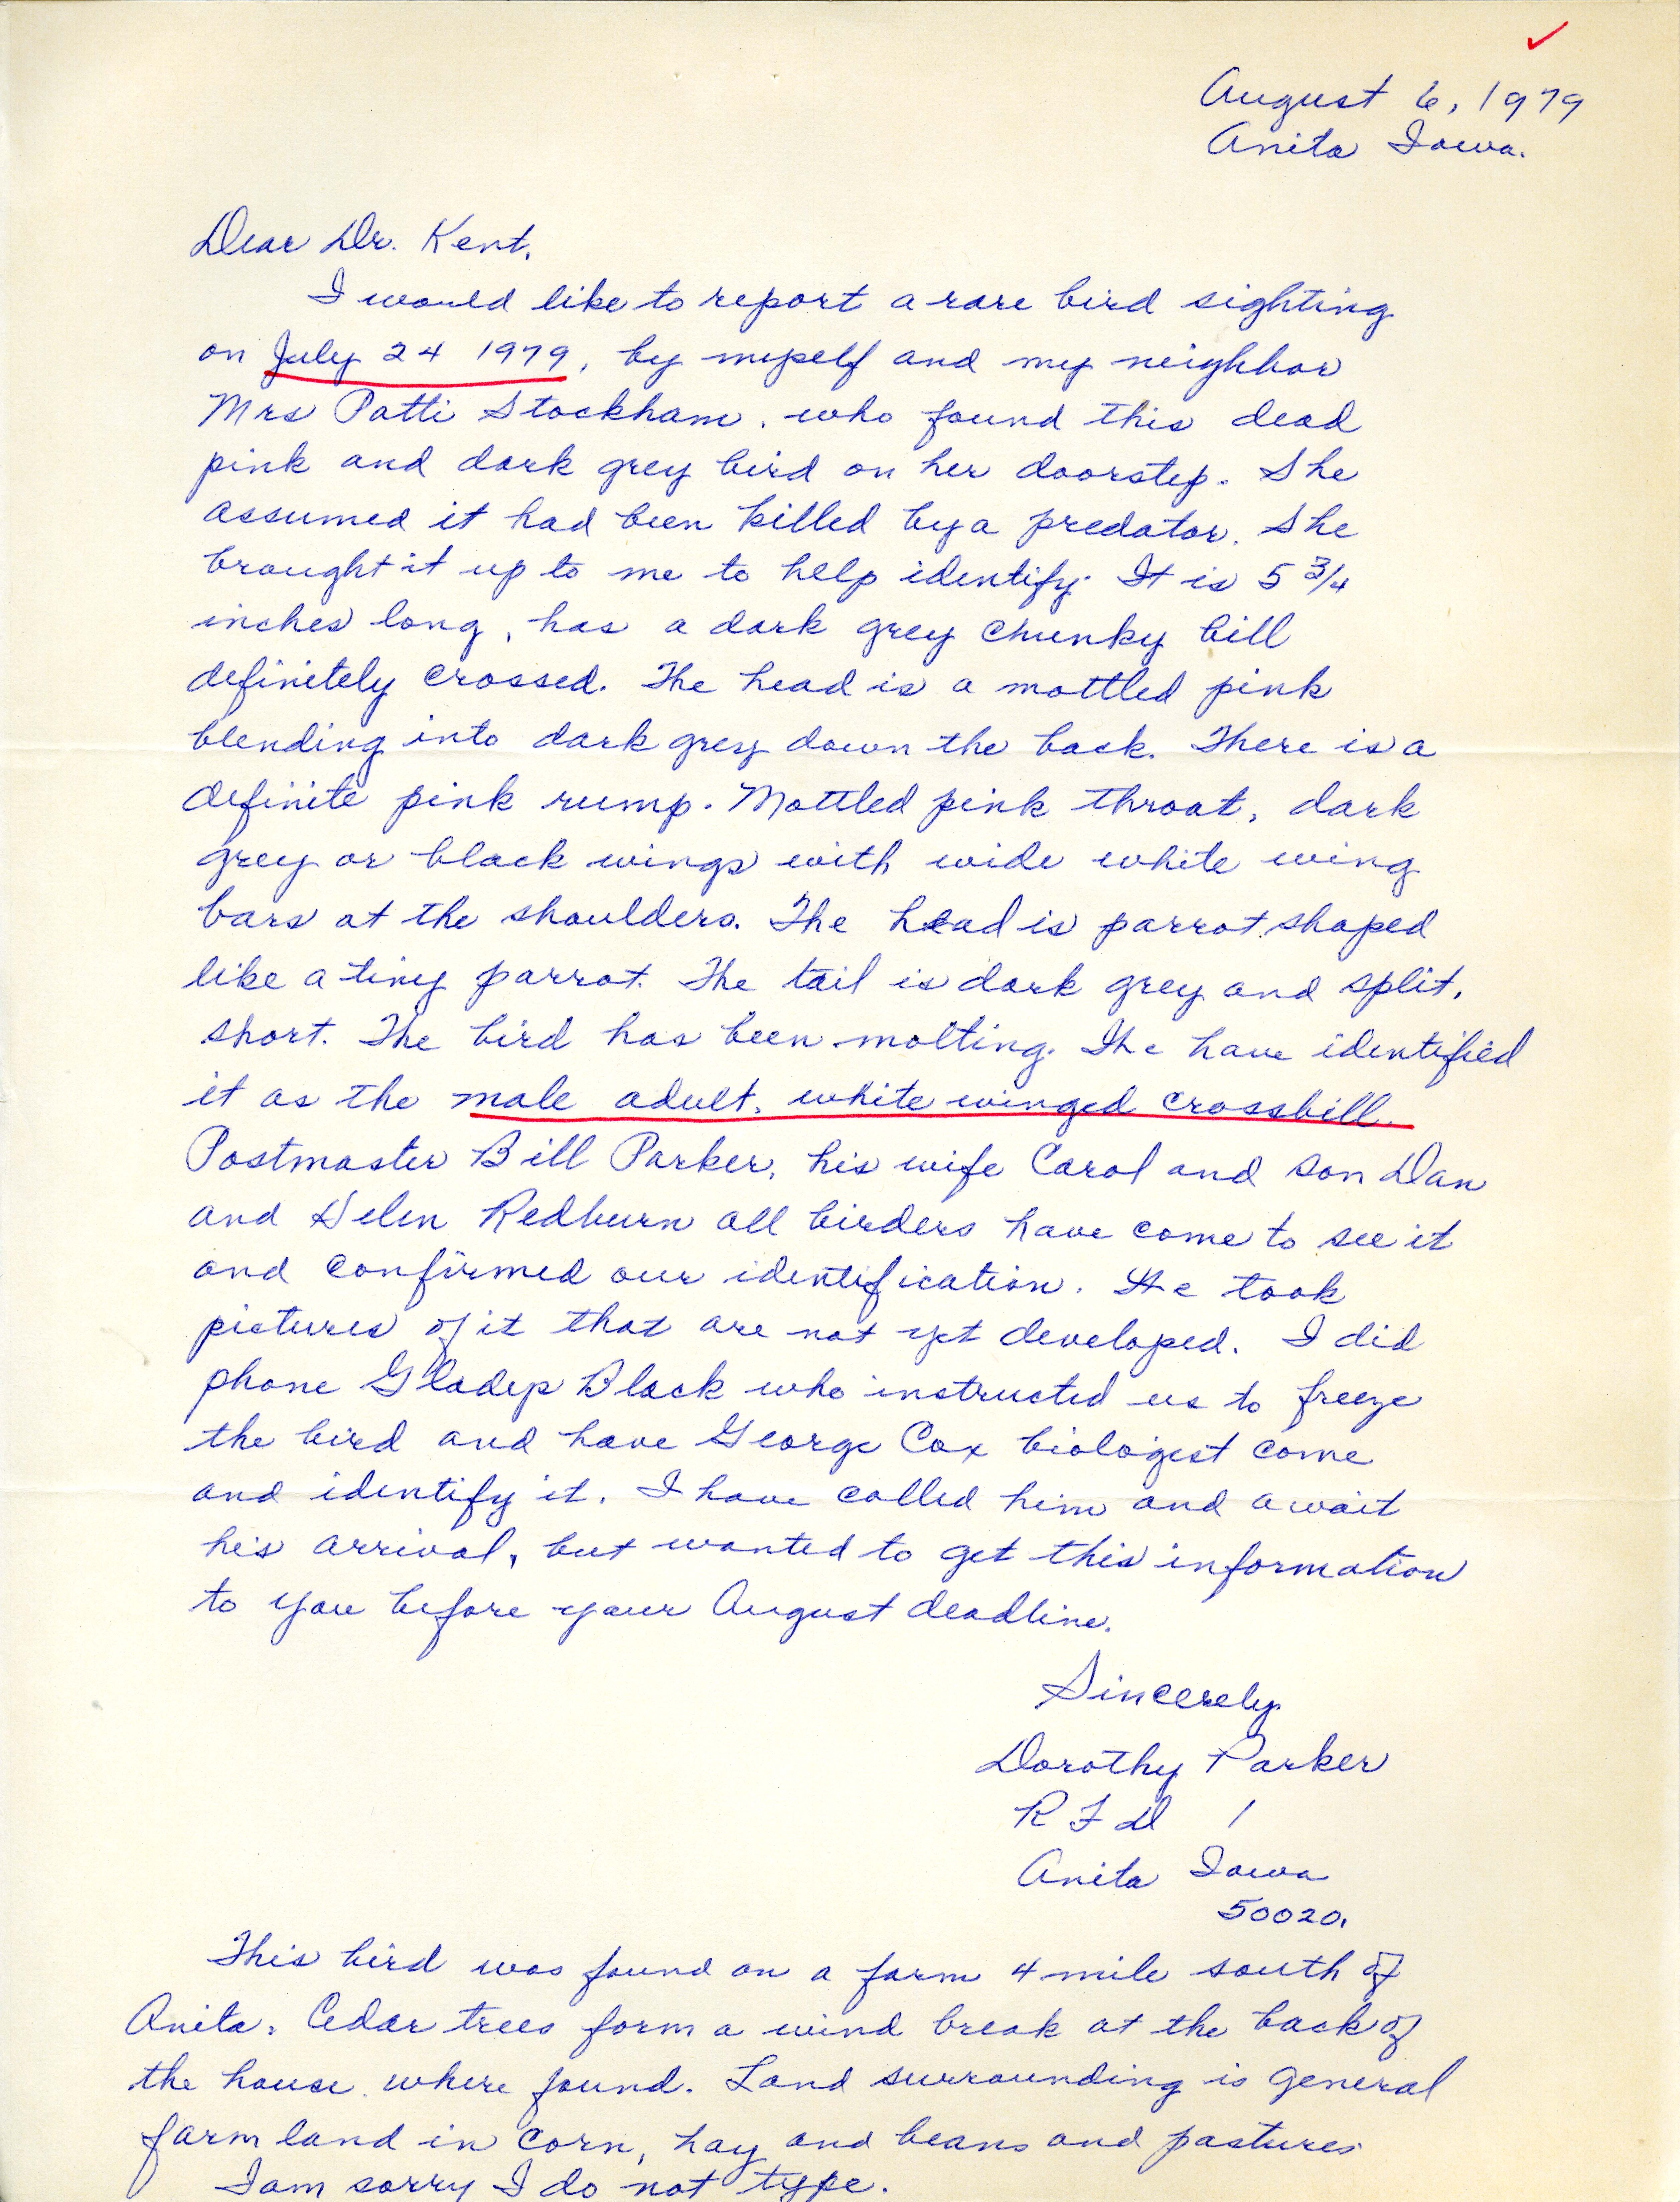 Dorothy Parker letter to Thomas H. Kent regarding rare bird sighting of a White-Winged Crossbill, August 6, 1979